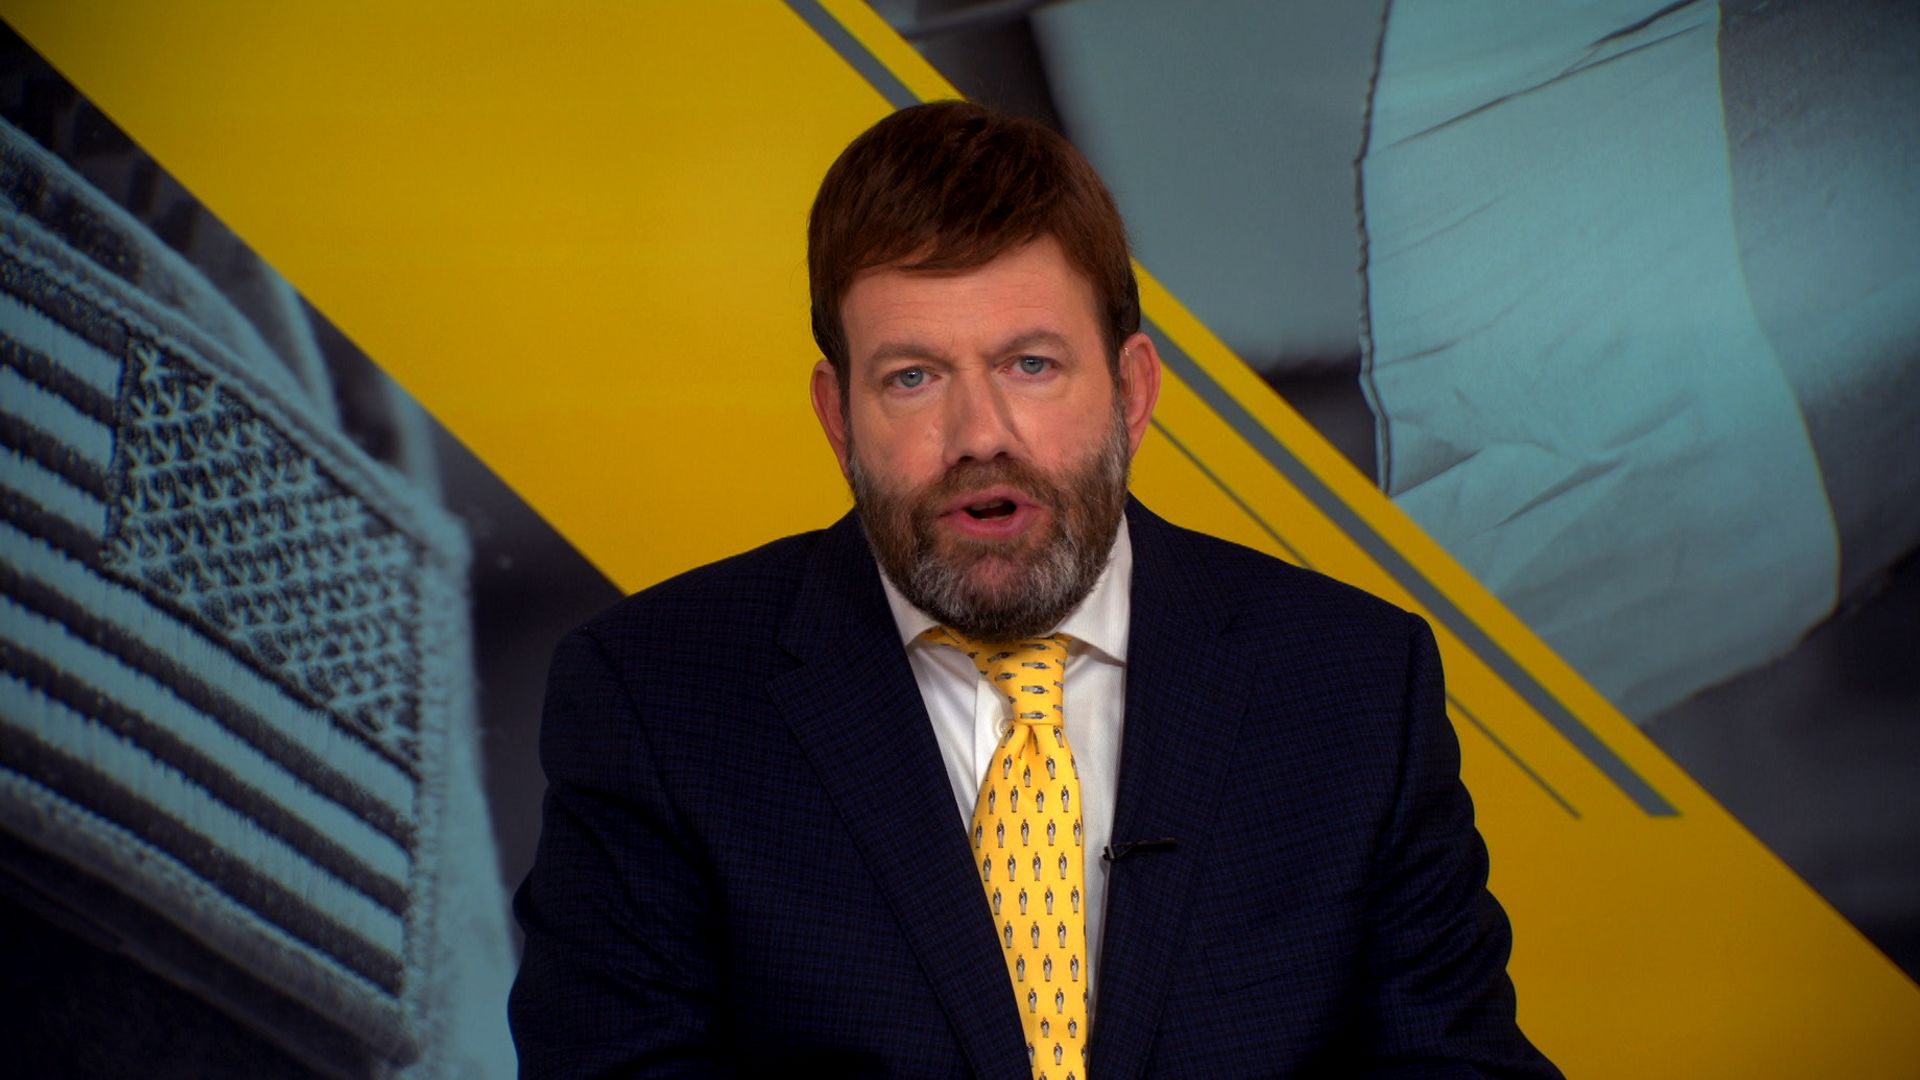 Dr. Frank Luntz asks Iowans about Ukraine, Zelenskyy, Putin and the war in this vital episode of his America Speaks series.